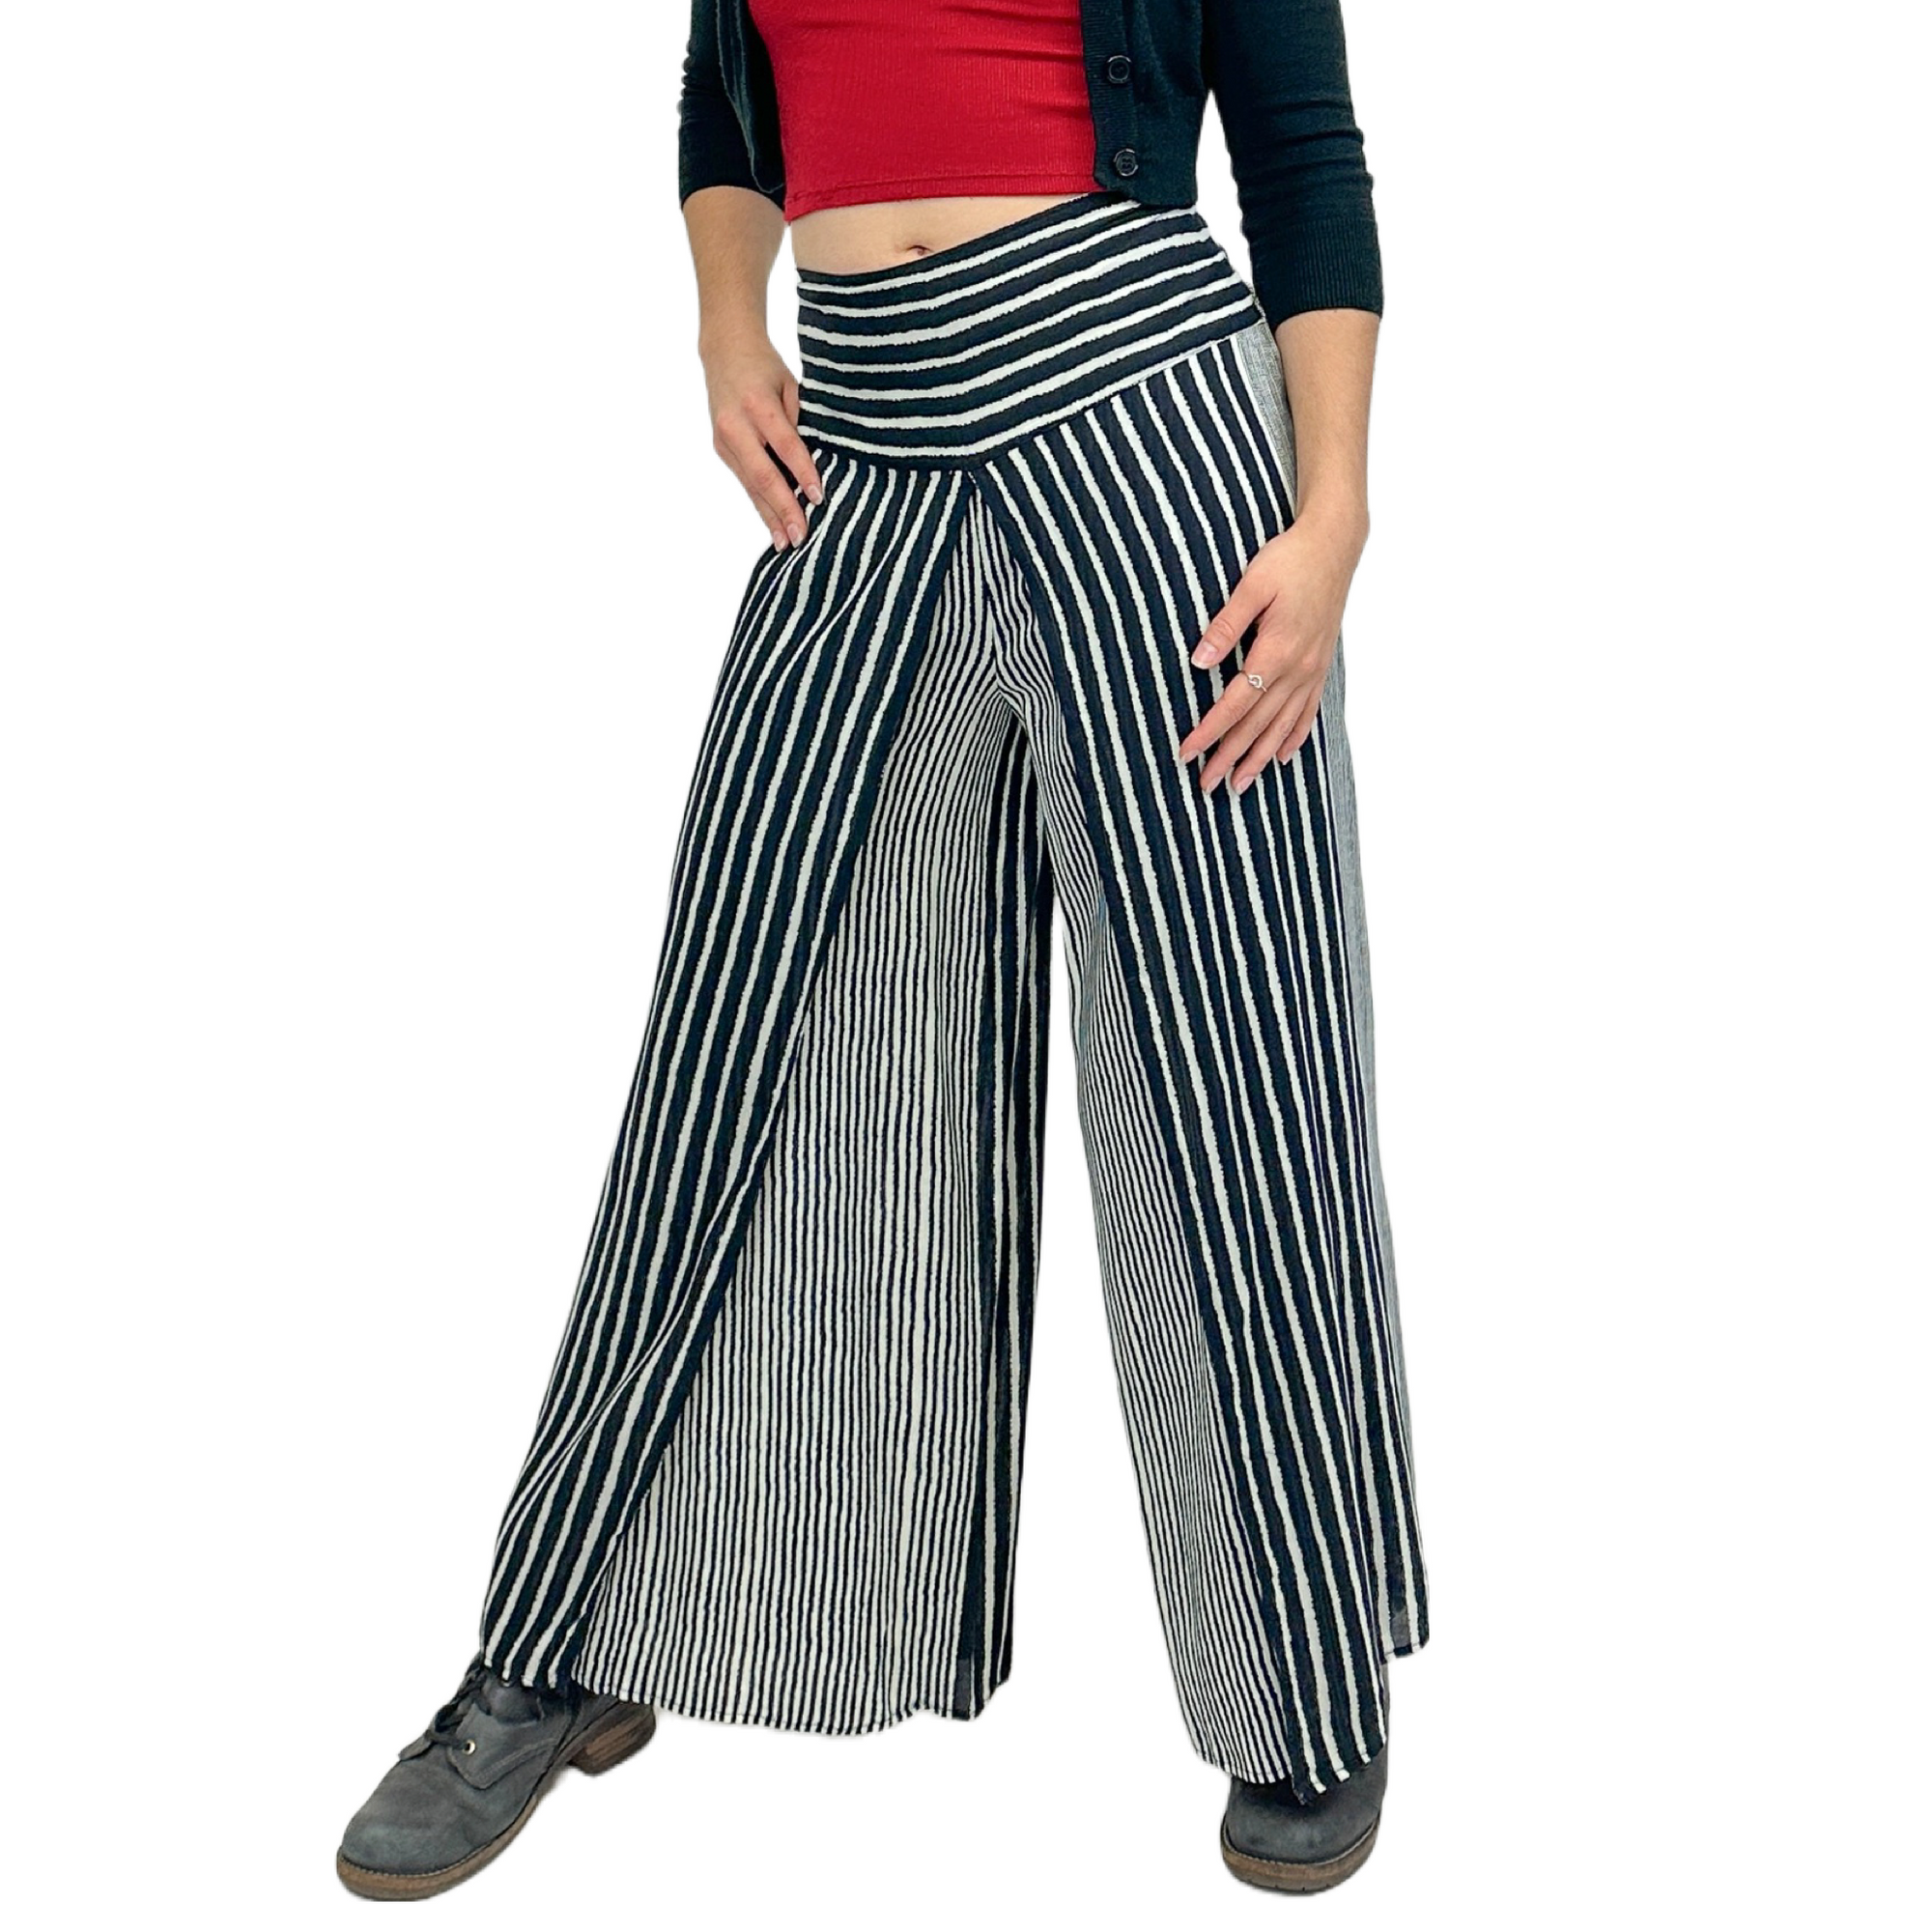 girls striped casual dress pants for women | designed in the USA | handmade in thailand | fairtrade summer rayon pants